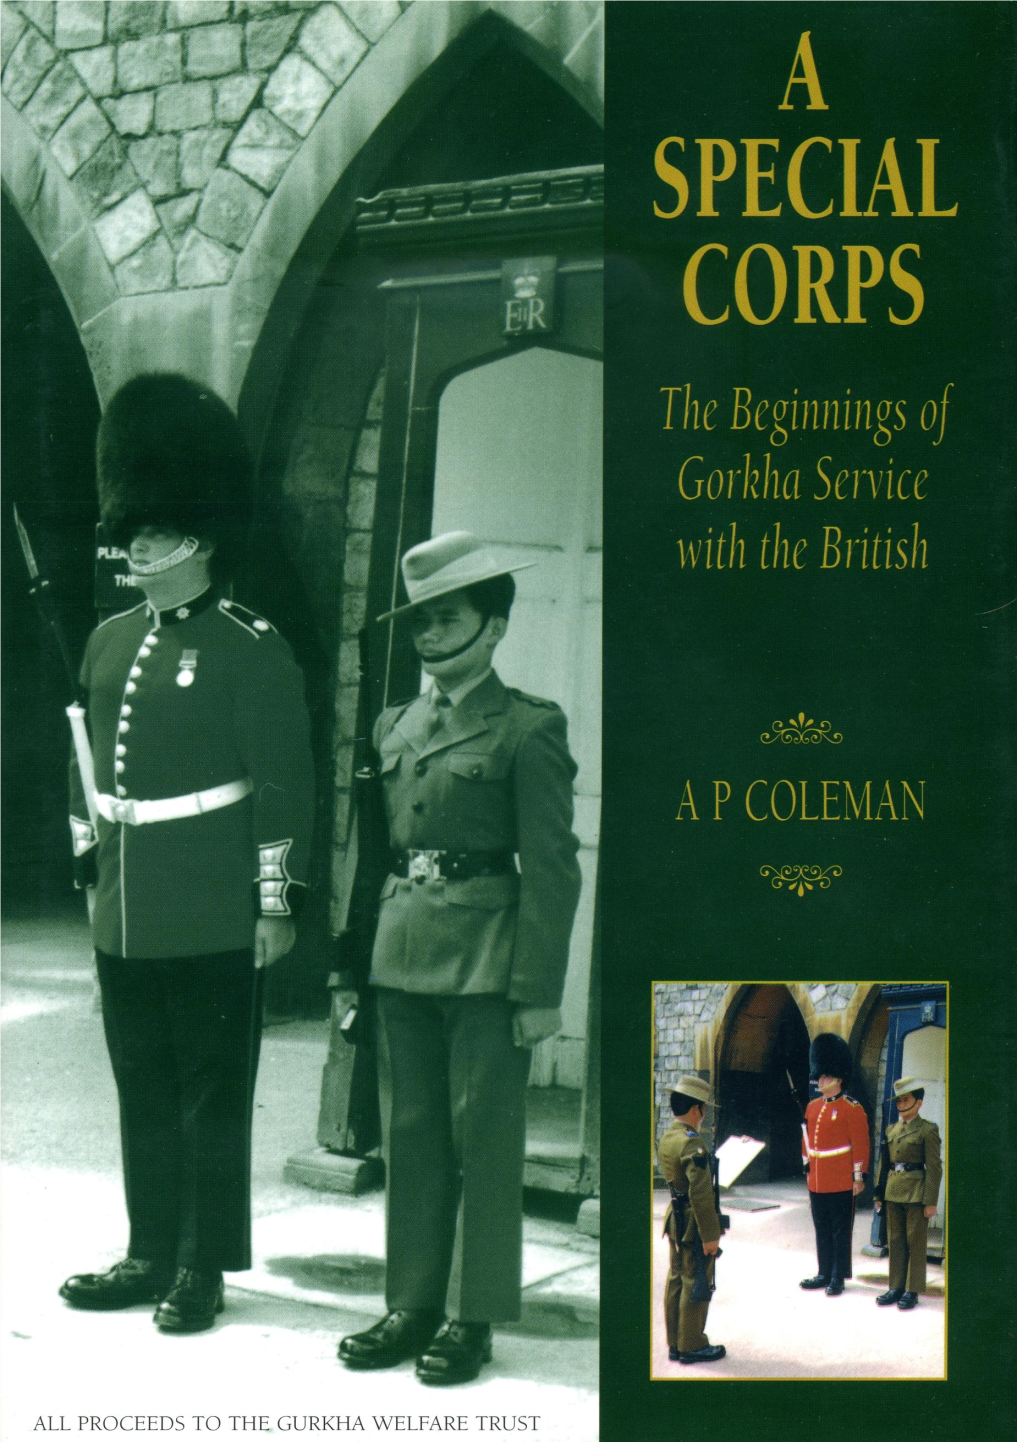 A Special Corps by a P Coleman, 1999